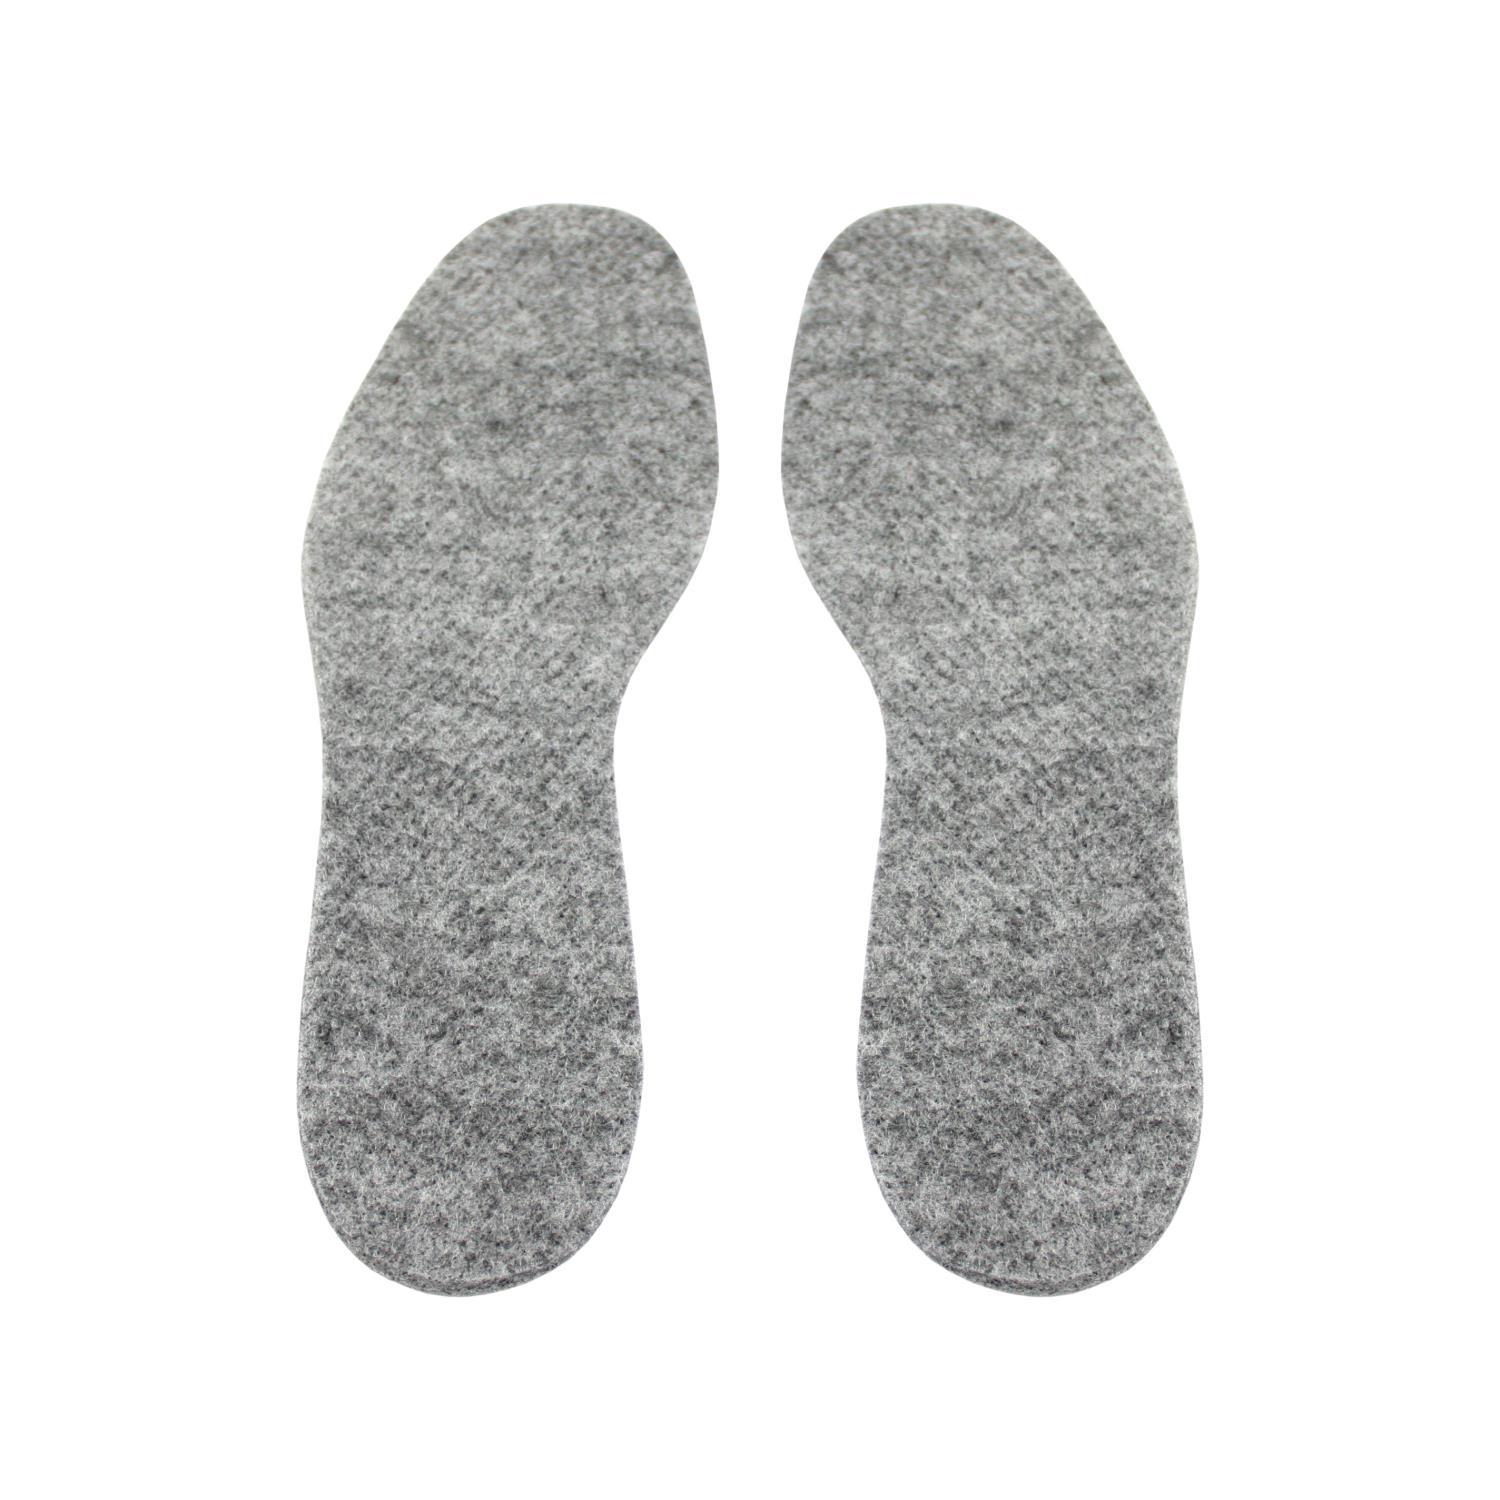 Buy Bama Felta Insole from Fane Valley Stores Agricultural Supplies